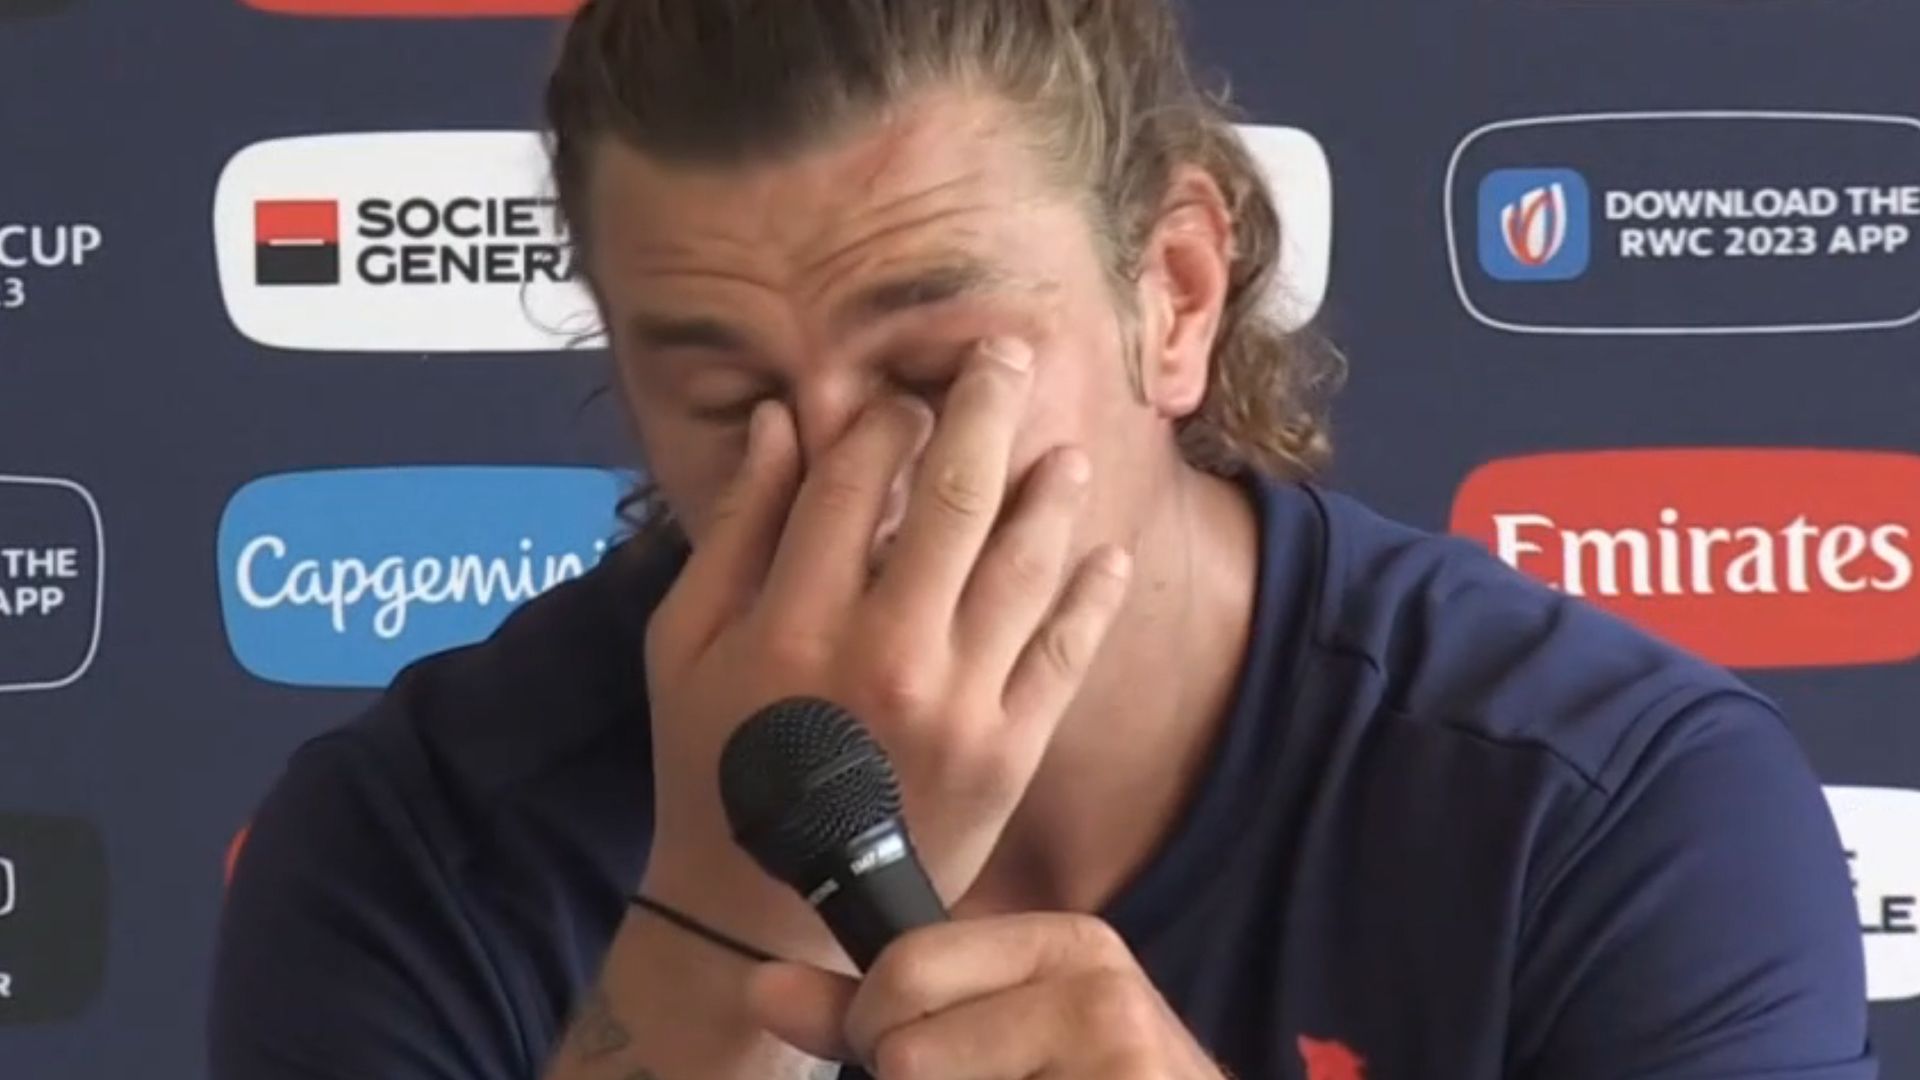 Bastien Chalureau wipes away tears upon being asked about racism allegations against him.